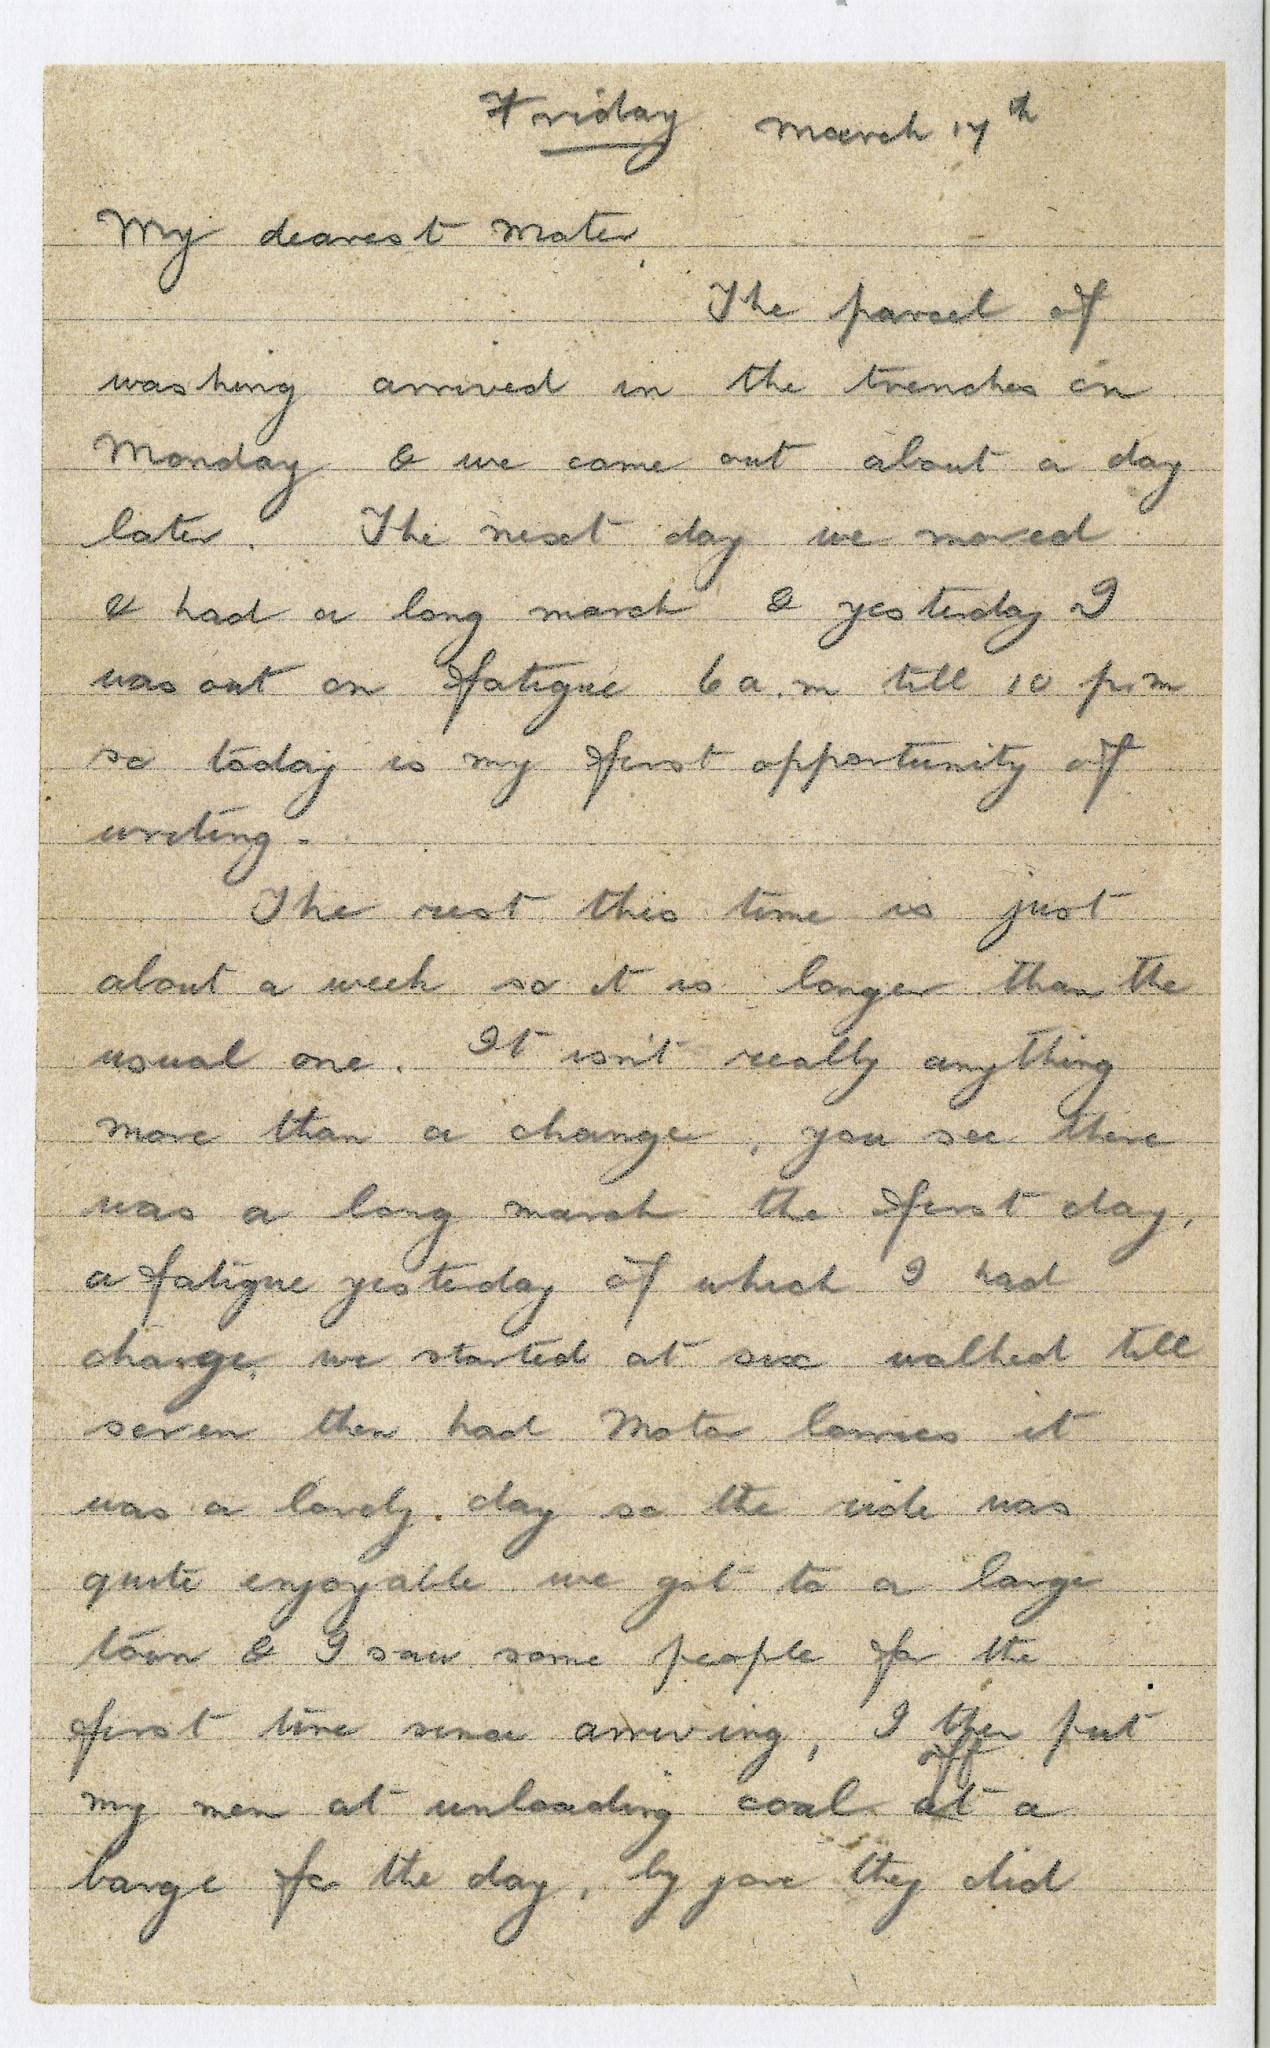 Styles AH letter 1 of 4. Photo courtesy of the Haines family archive.